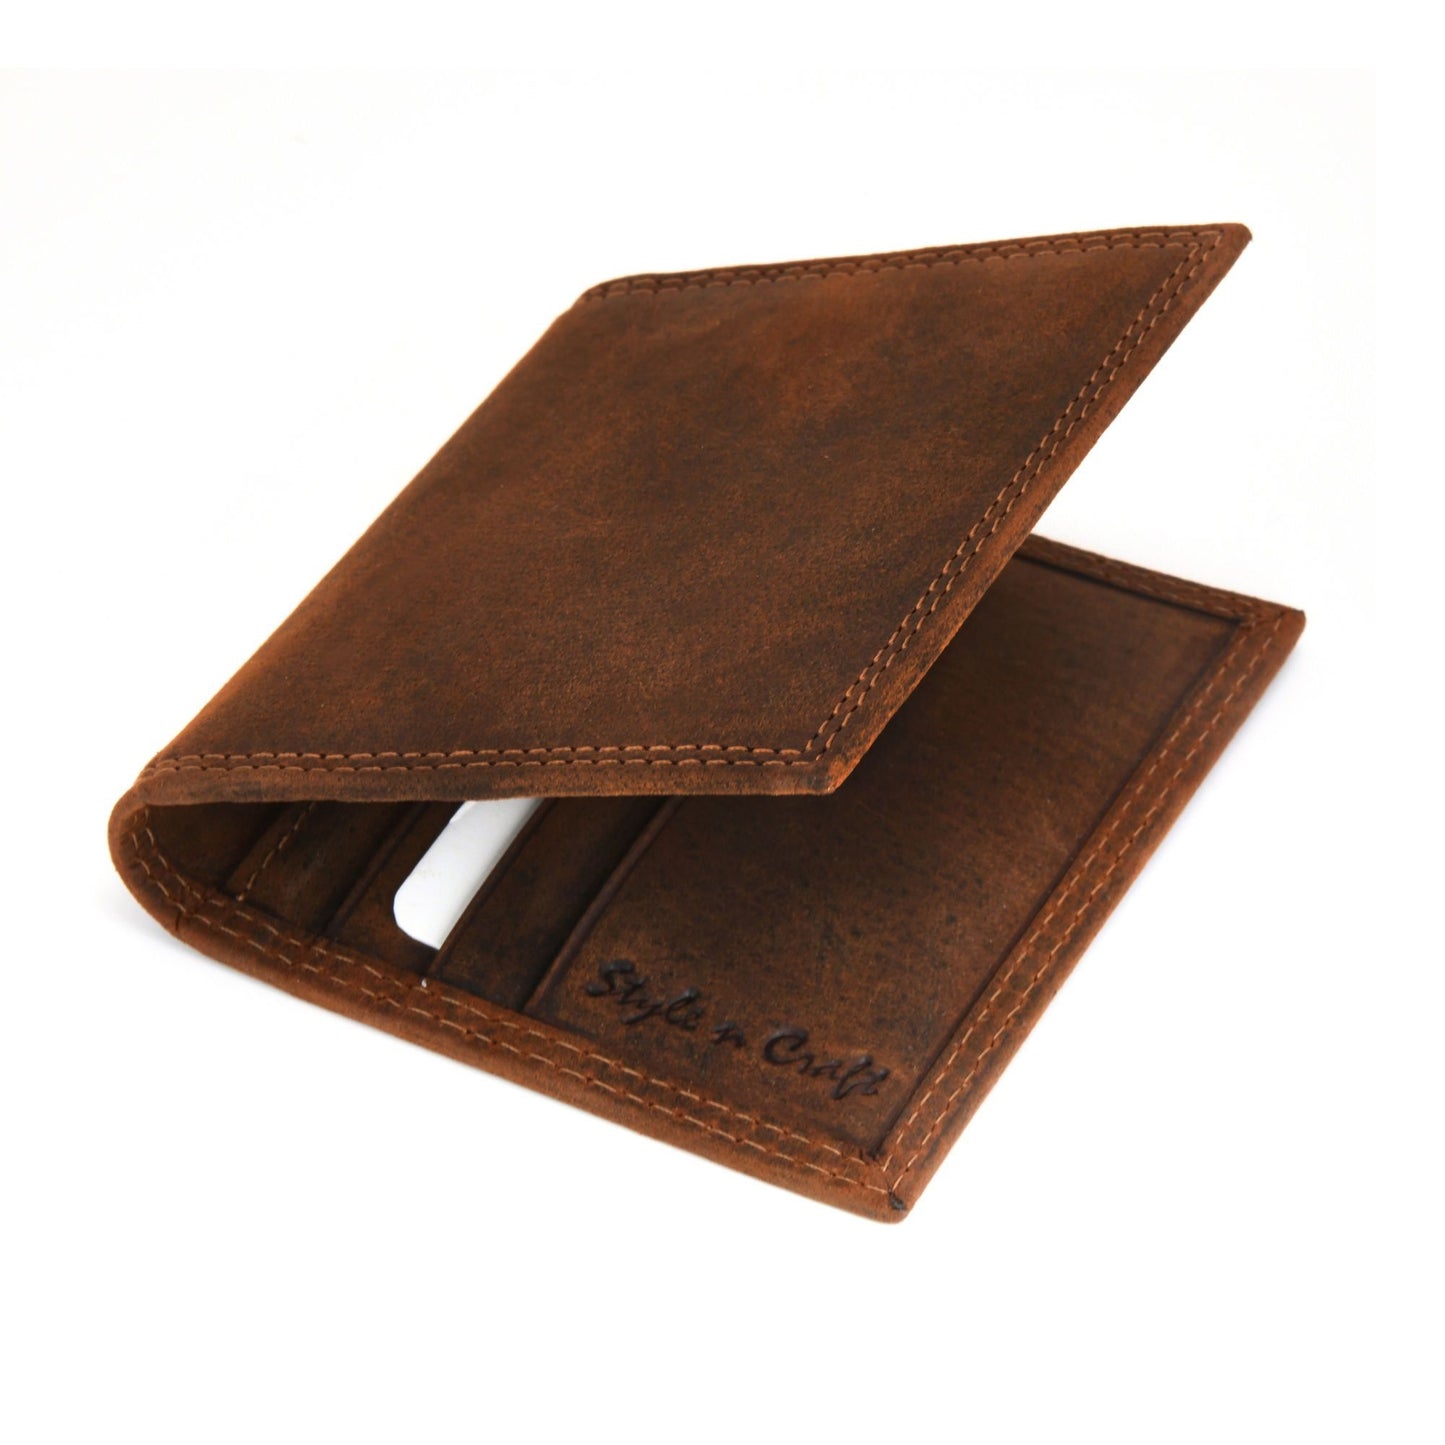 Style n Craft 300703-BR Credit Card / Business Card Case in Brown Leather with Vintage like 2 Tone Effect & Double Stitching on the outside. It has RFID Protection. Closed Angled View - Picture of Wallet in a Lighter Shade